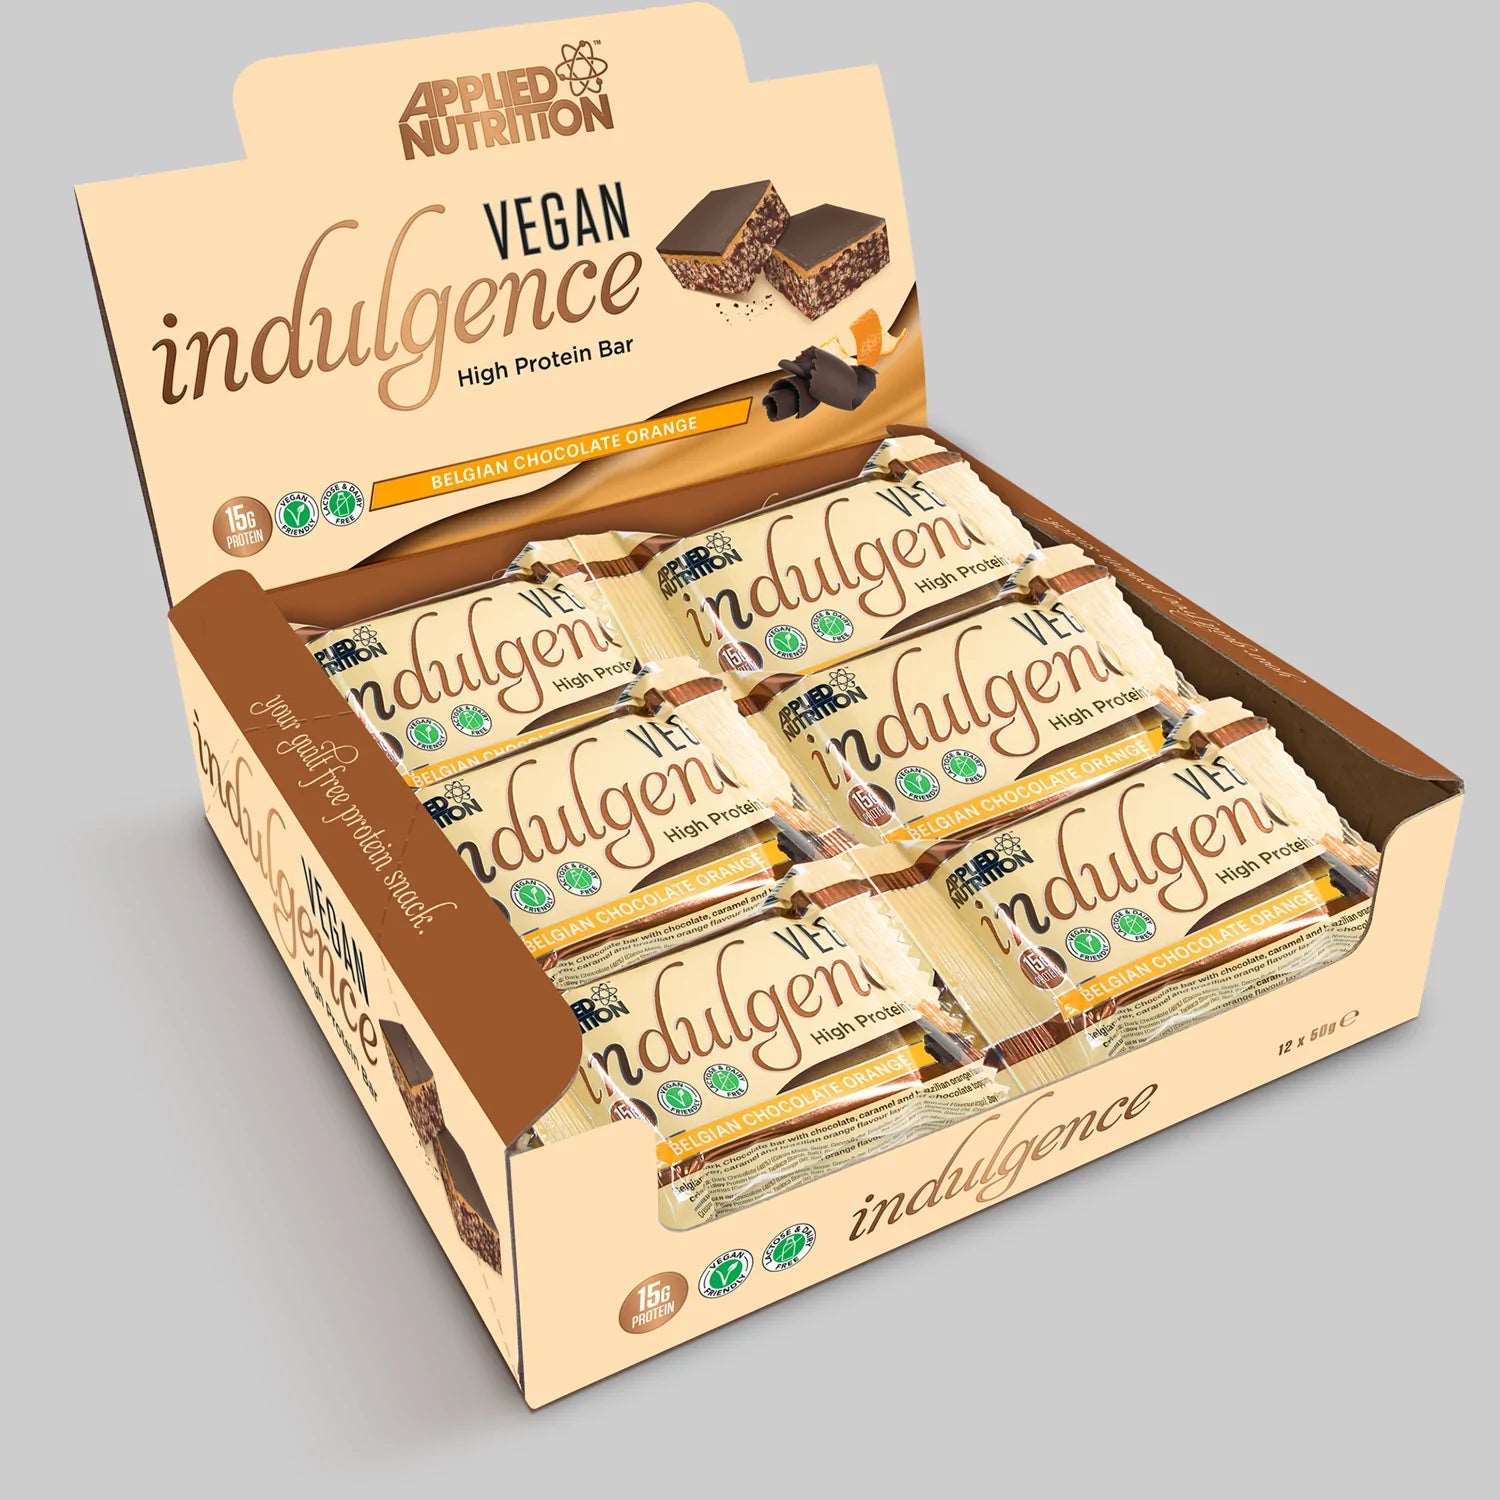 Applied Nutrition Vegan Indulgence Protein Bar (1 BOX of 12) Protein Snacks Belgian Chocolate Orange BEST BY OCT 9/2022 Applied Nutrition